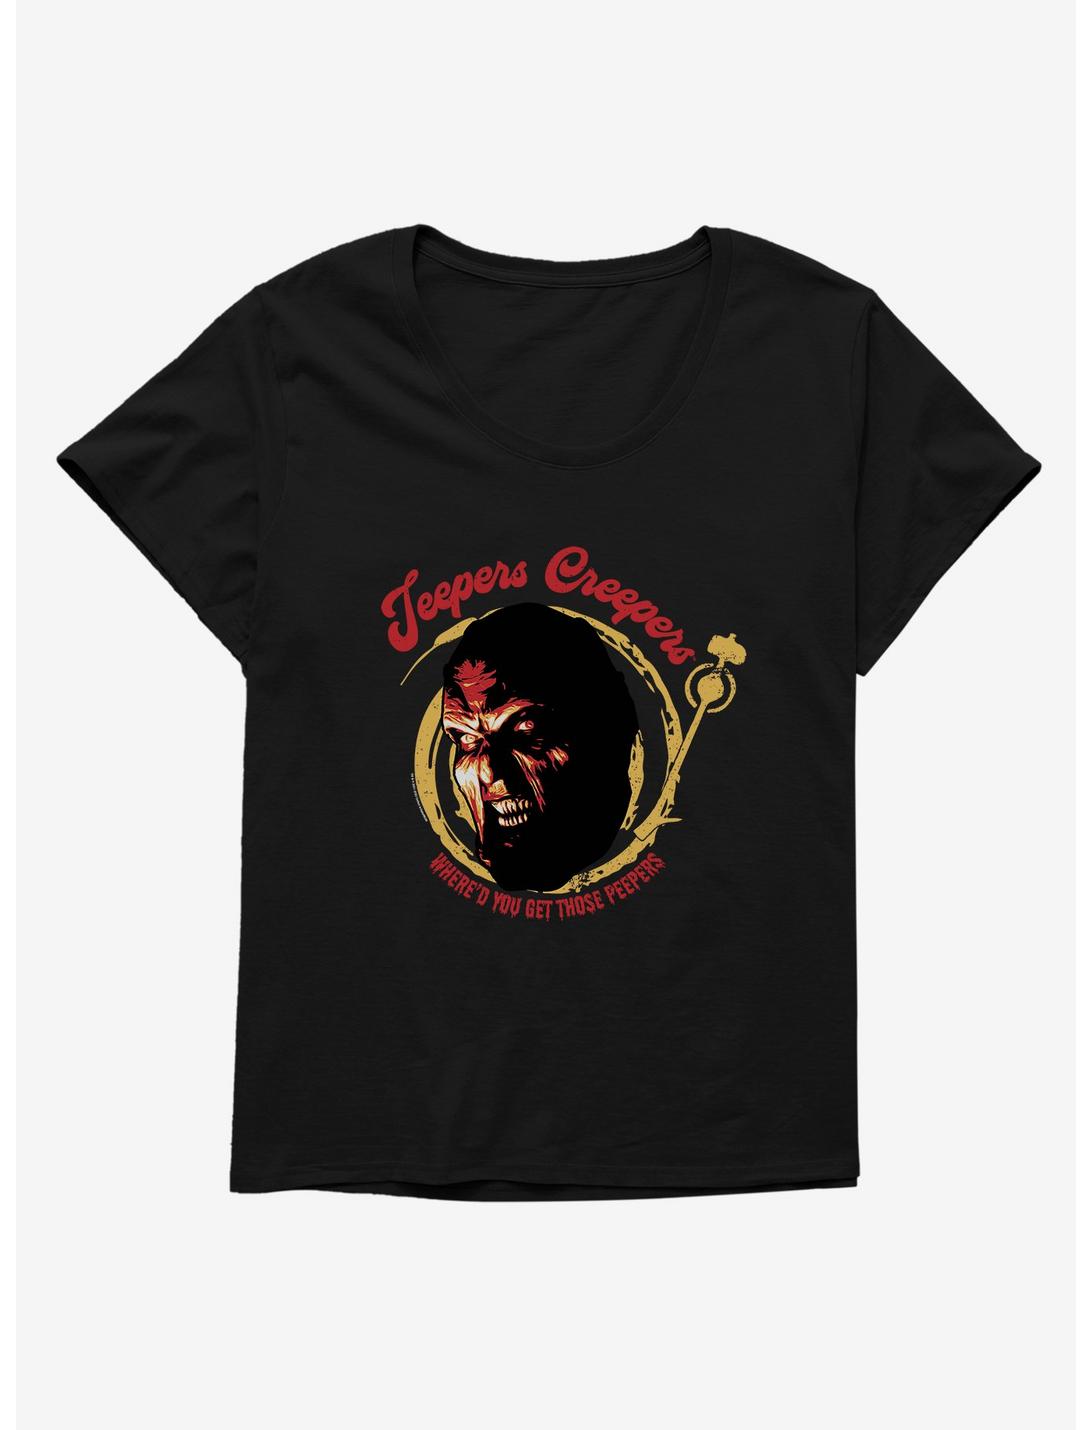 Jeepers Creepers Peepers Girls T-Shirt Plus Size, BLACK, hi-res